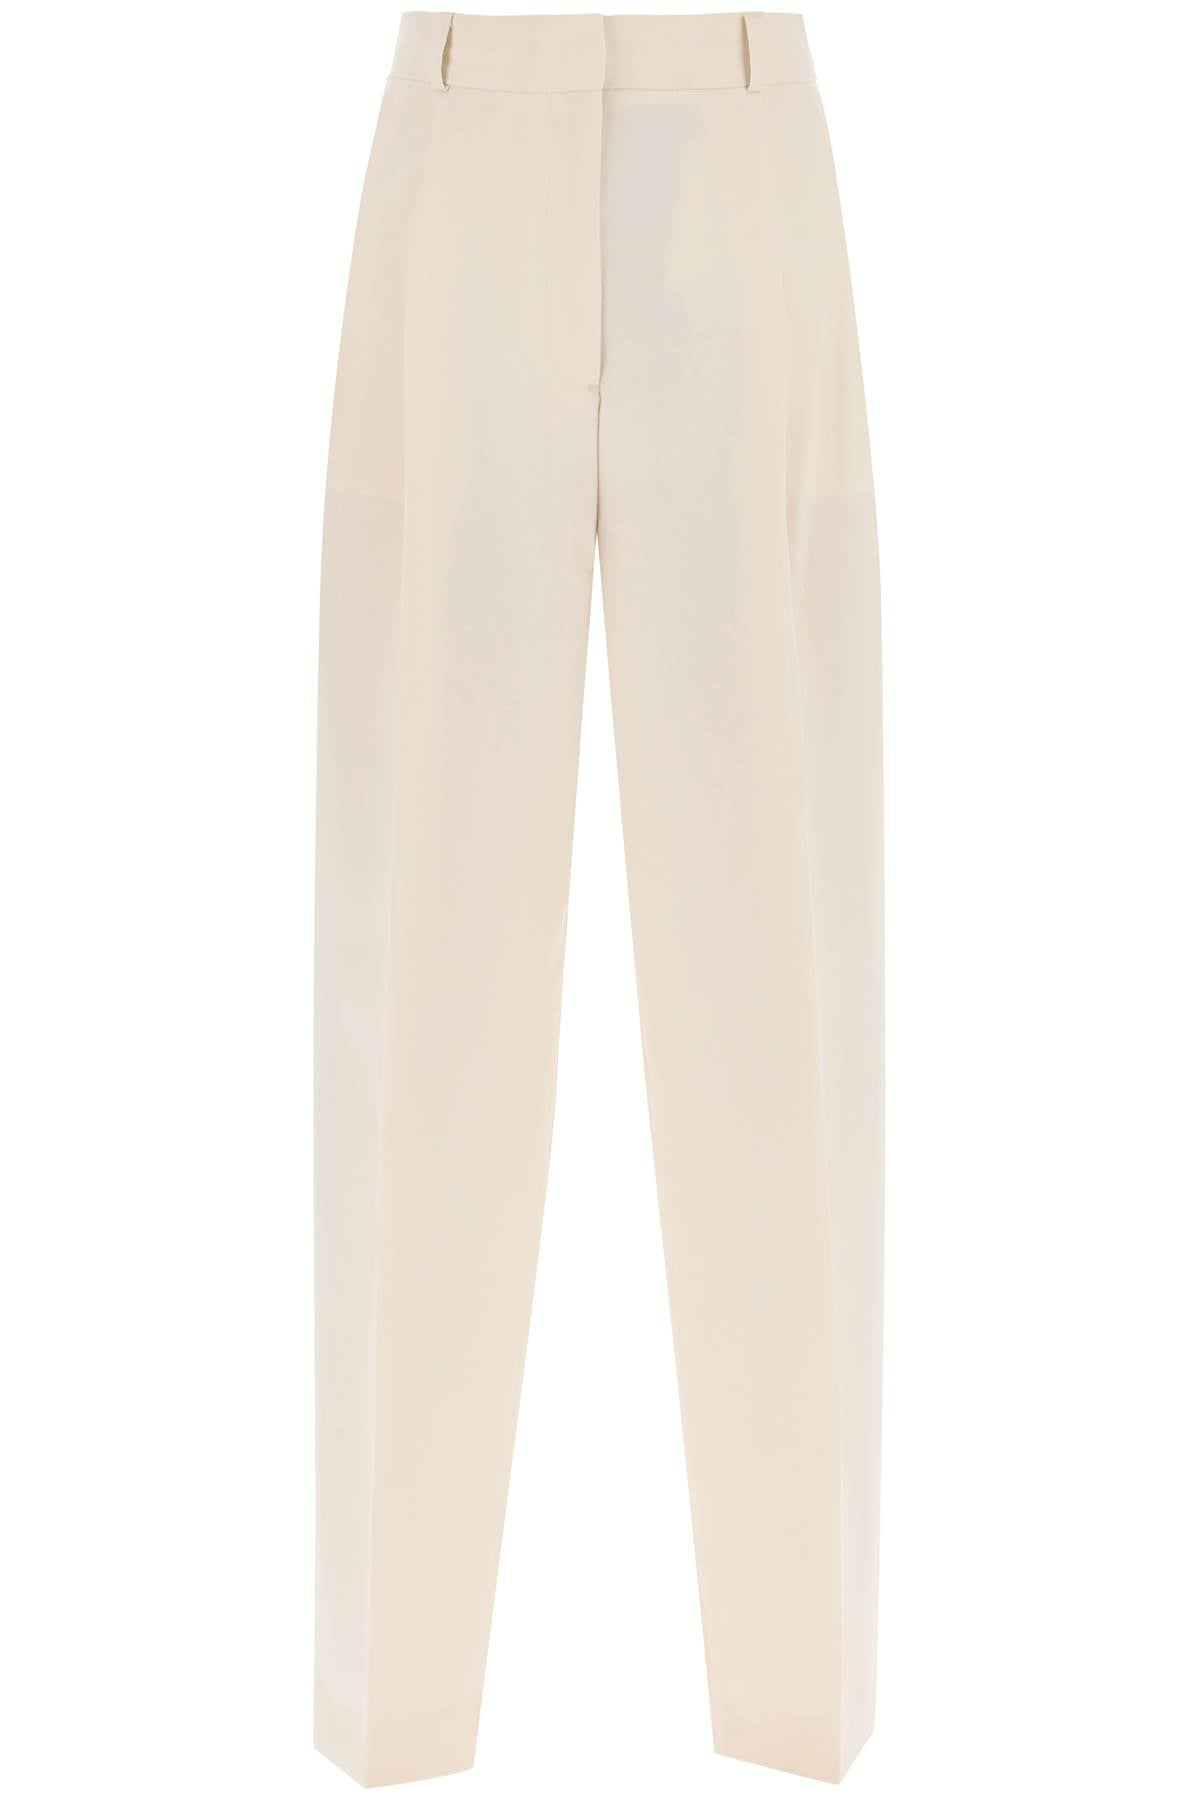 Toteme double-pleated viscose trousers 234 WRB847 FB0065 SNOW